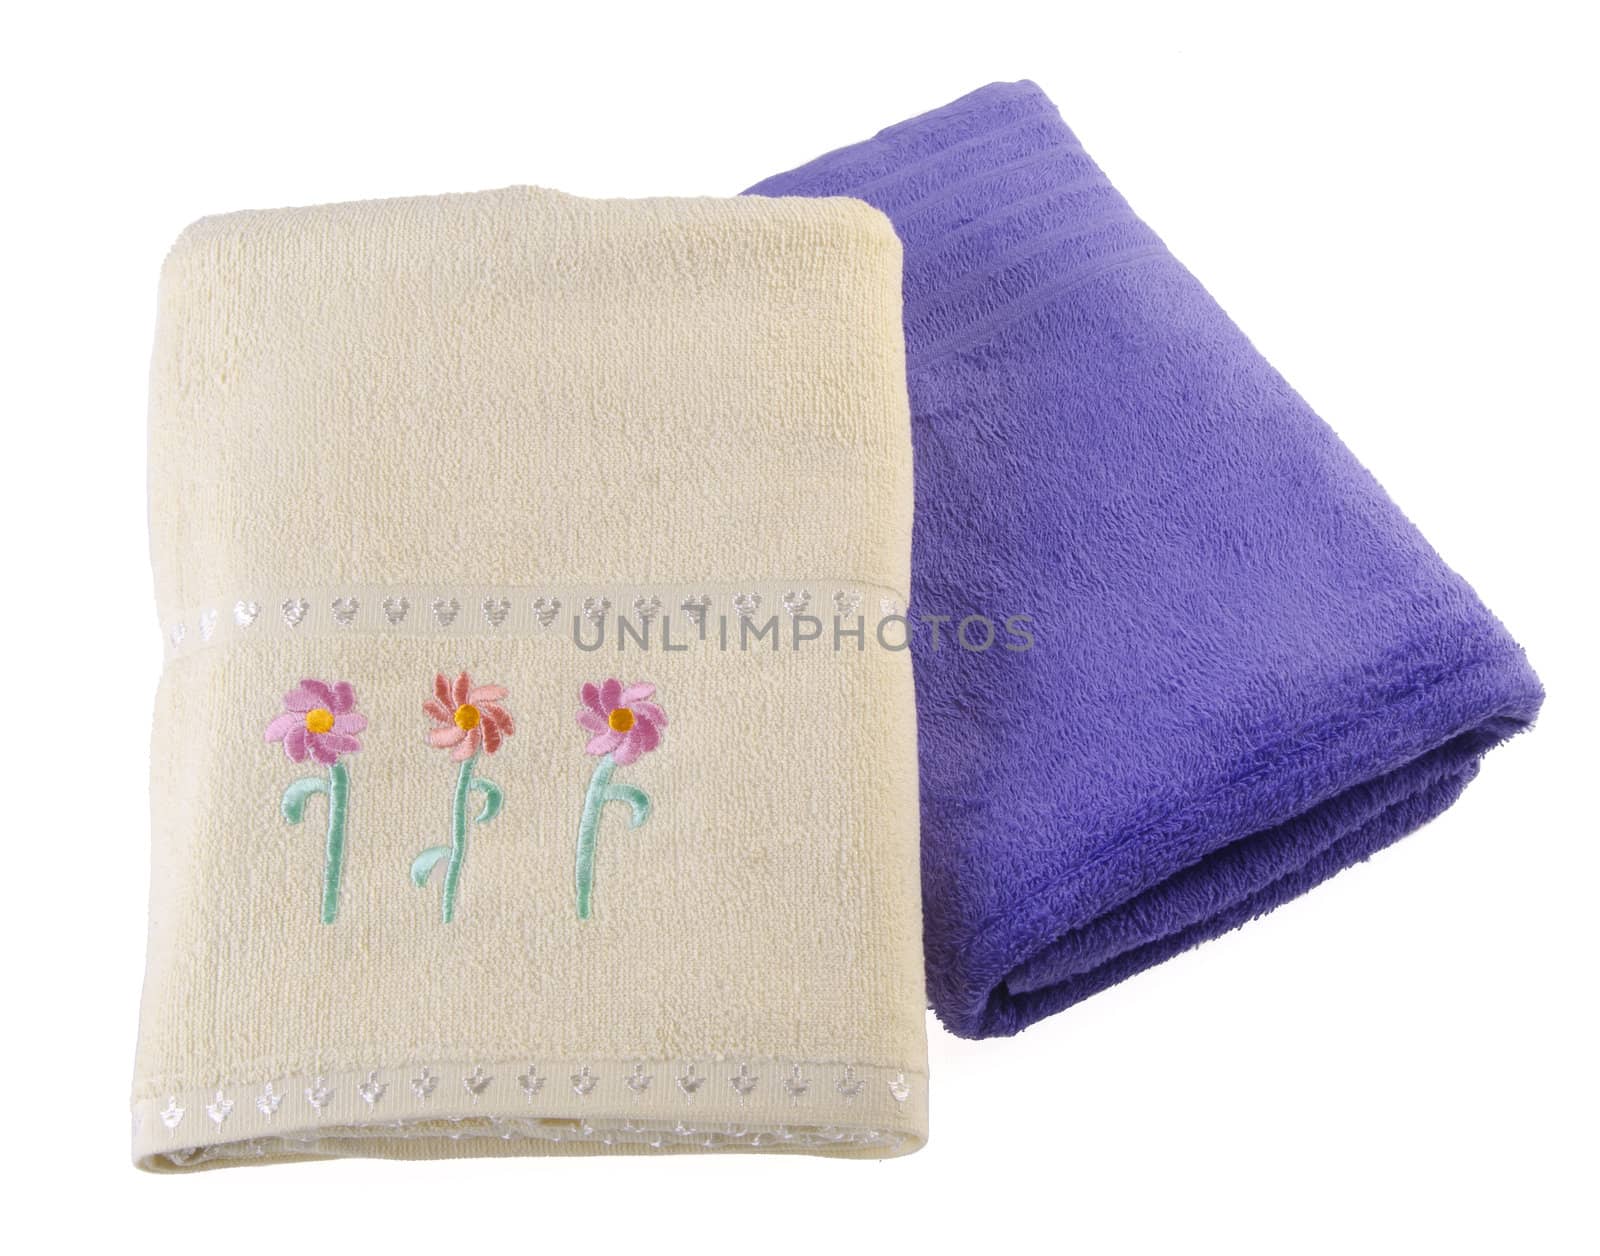 towel on a white background